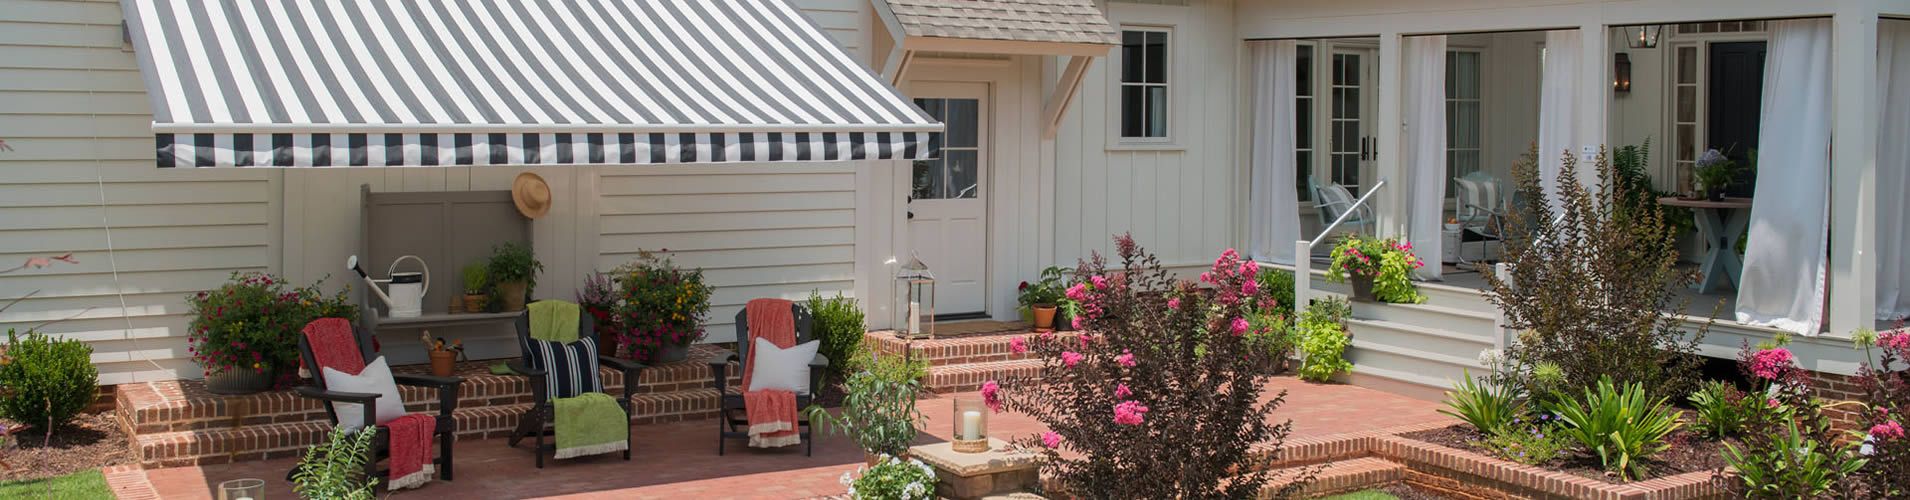 Palm Beach awnings for residential homes